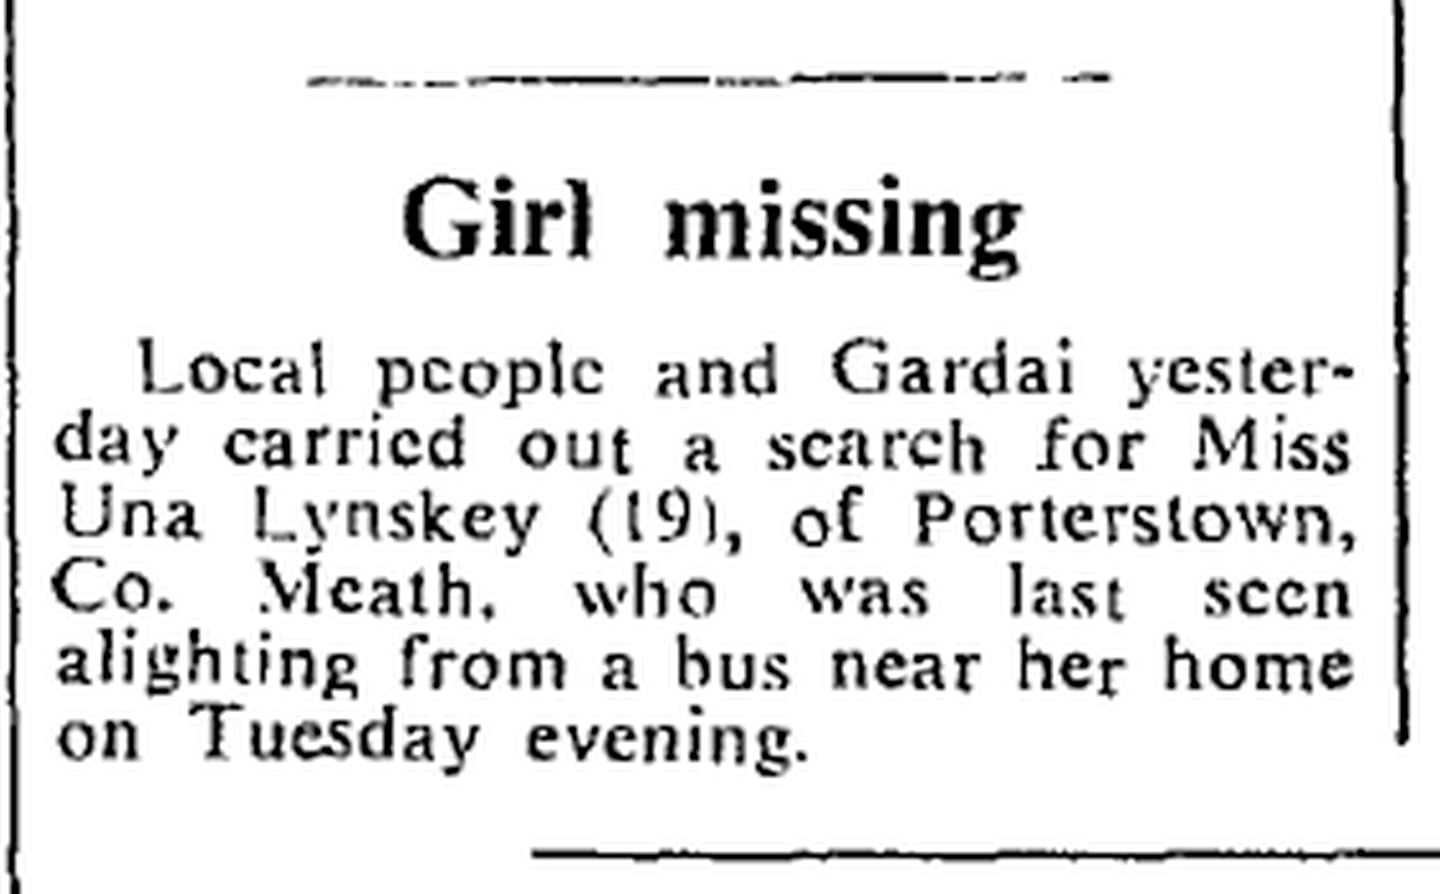 THE DEATH of Úna Lynskey (19) in 1971 shocked the rural community of Porterstown Lane, near Ratoath in Meath, and caused a bitter split between families and relatives living in the area.

The civil servant disappeared when she was returning from work at the Land Commission on October 12th, 1971.

She had taken the bus from Dublin and was last seen making the 15-minute journey on foot from the bus stop to her home.

Two months later her body was found in the Dublin mountains. A postmortem failed to reveal exactly how she died. She had no broken bones and there were no signs that she had been strangled.

This piece appeared on the front page of The Irish Times on October 13th, 1971